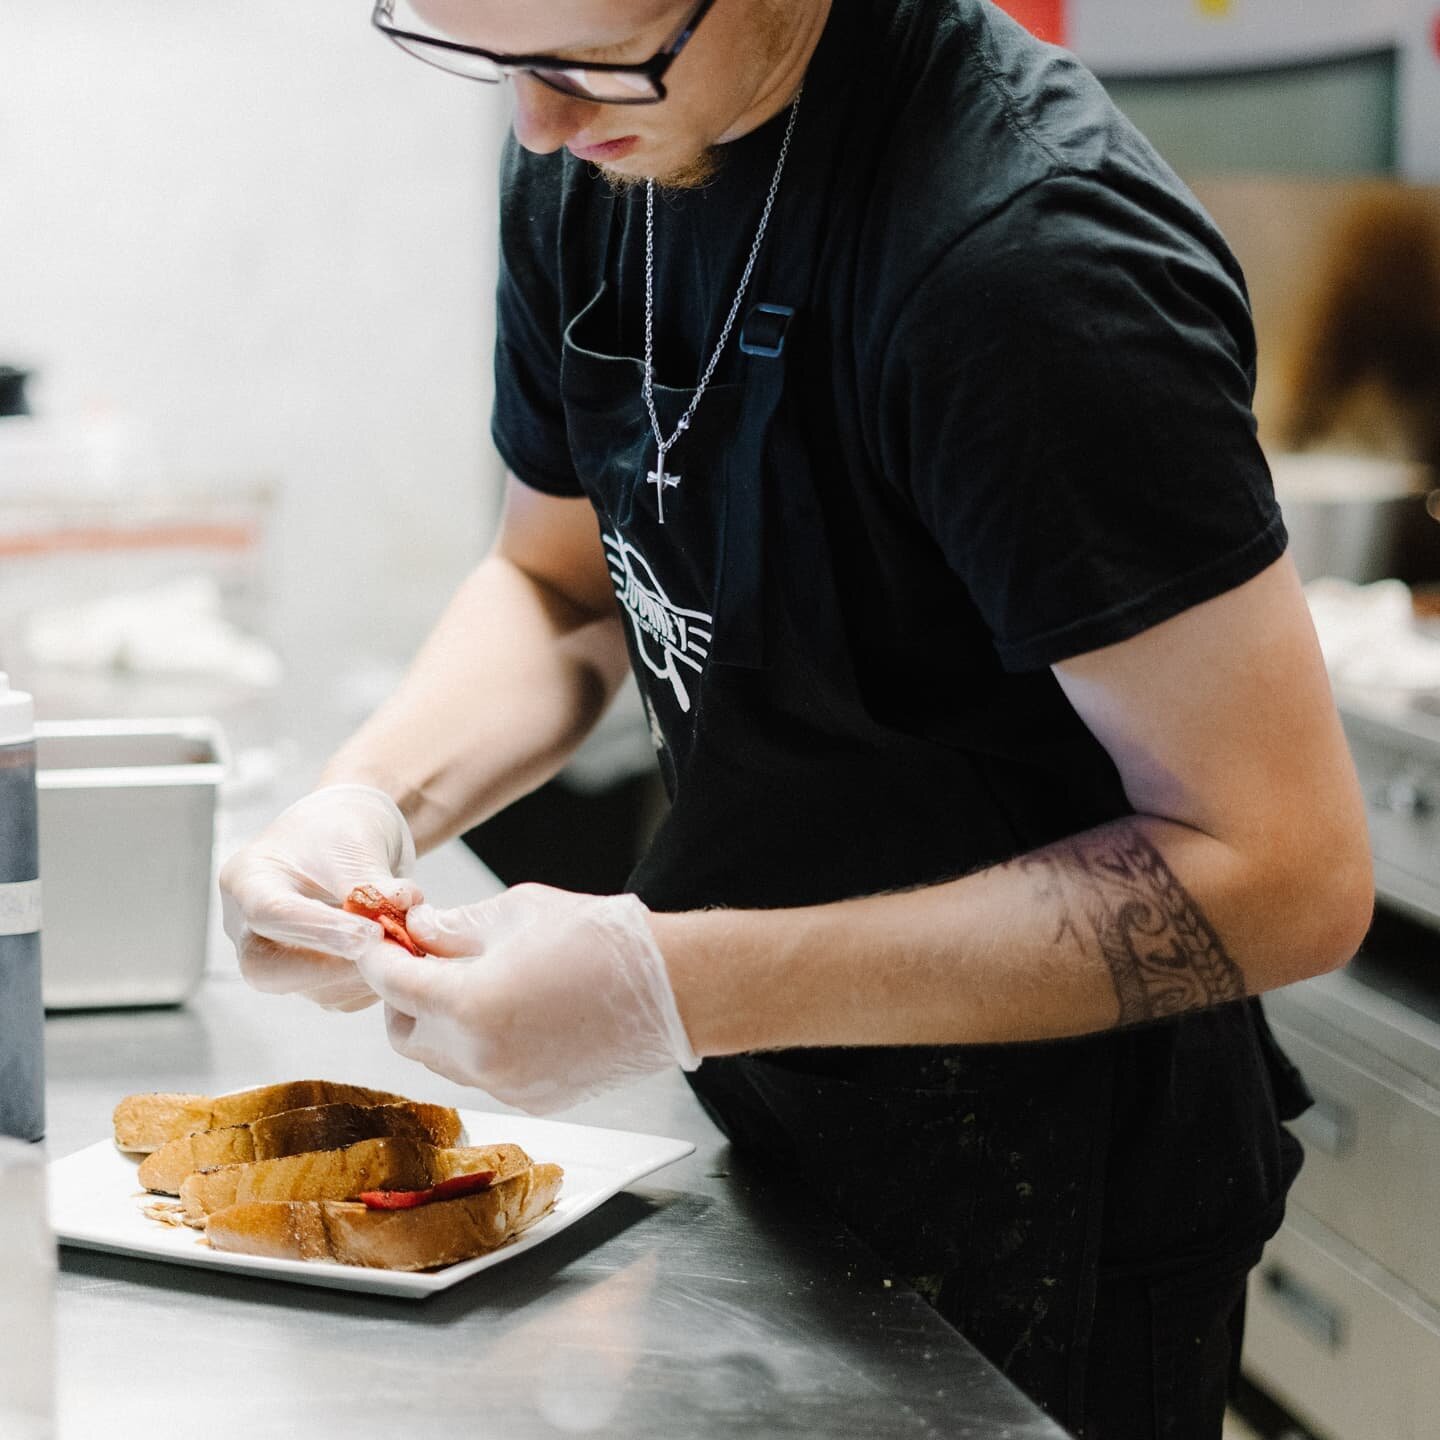 Kyle preparing last week's French Toast special, Strawberry Sage.

We've got a NEW specialty flavor for French Toast Friday tomorrow! Come on in and enjoy a treat with us! 

Served all day until 2PM. 
#journeydowntown #frenchtoastfridays #downtownvac